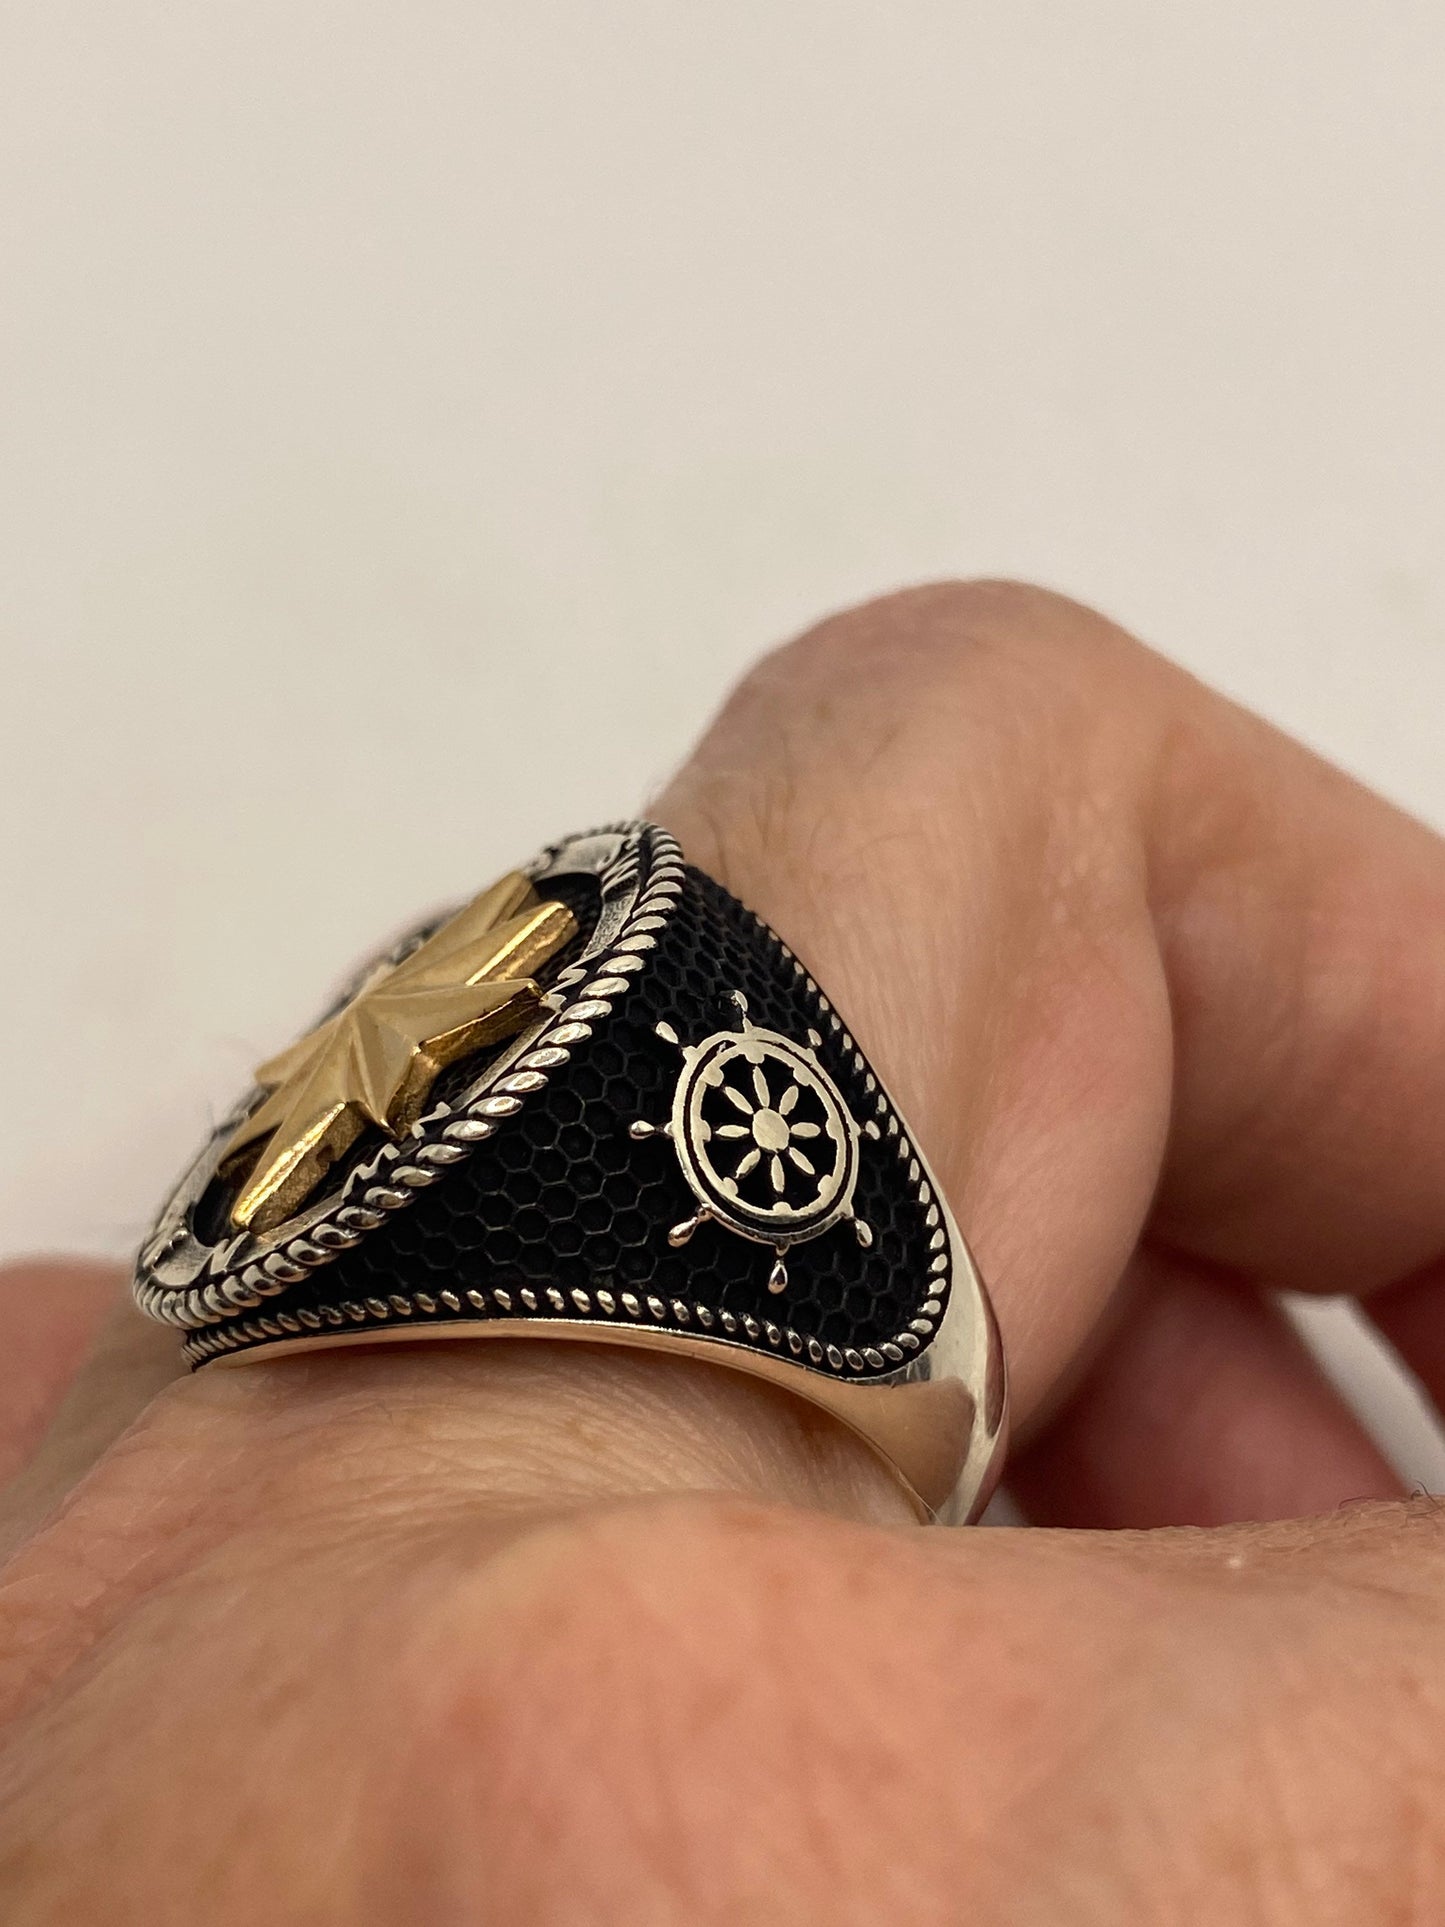 Vintage Nautical Star 925 Sterling Silver Ring